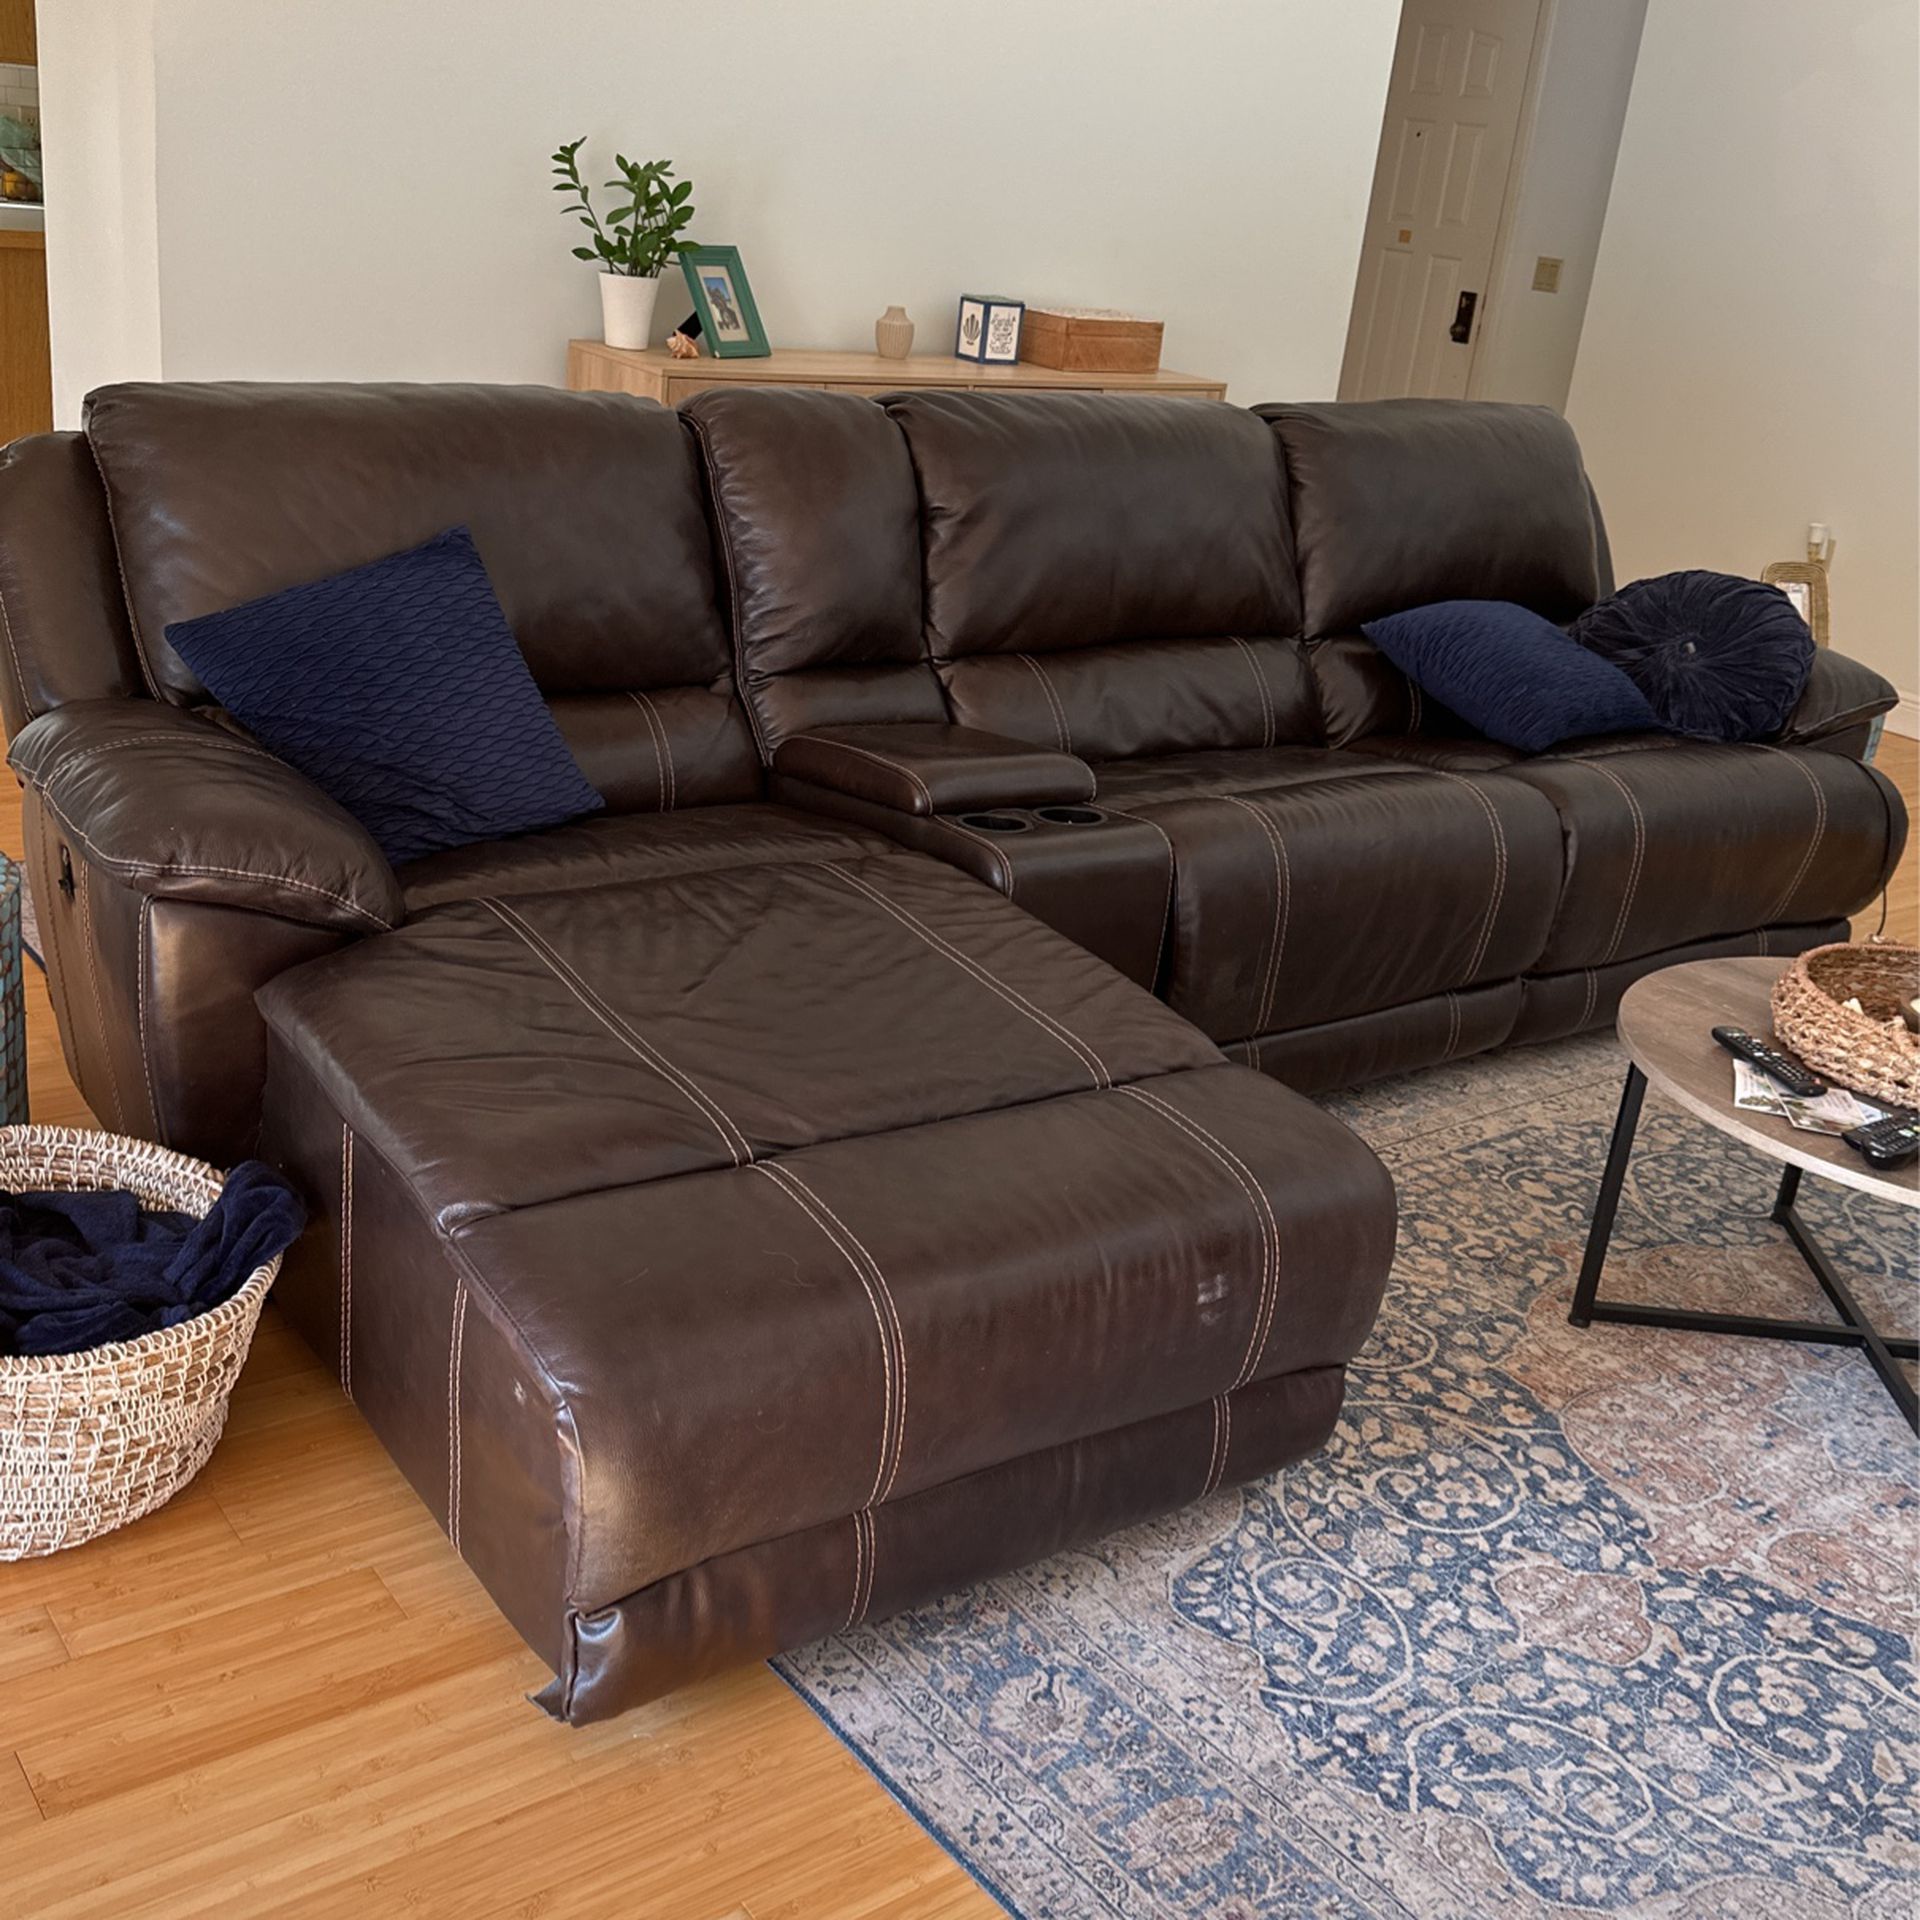 Brown Leather Couch  OBO 